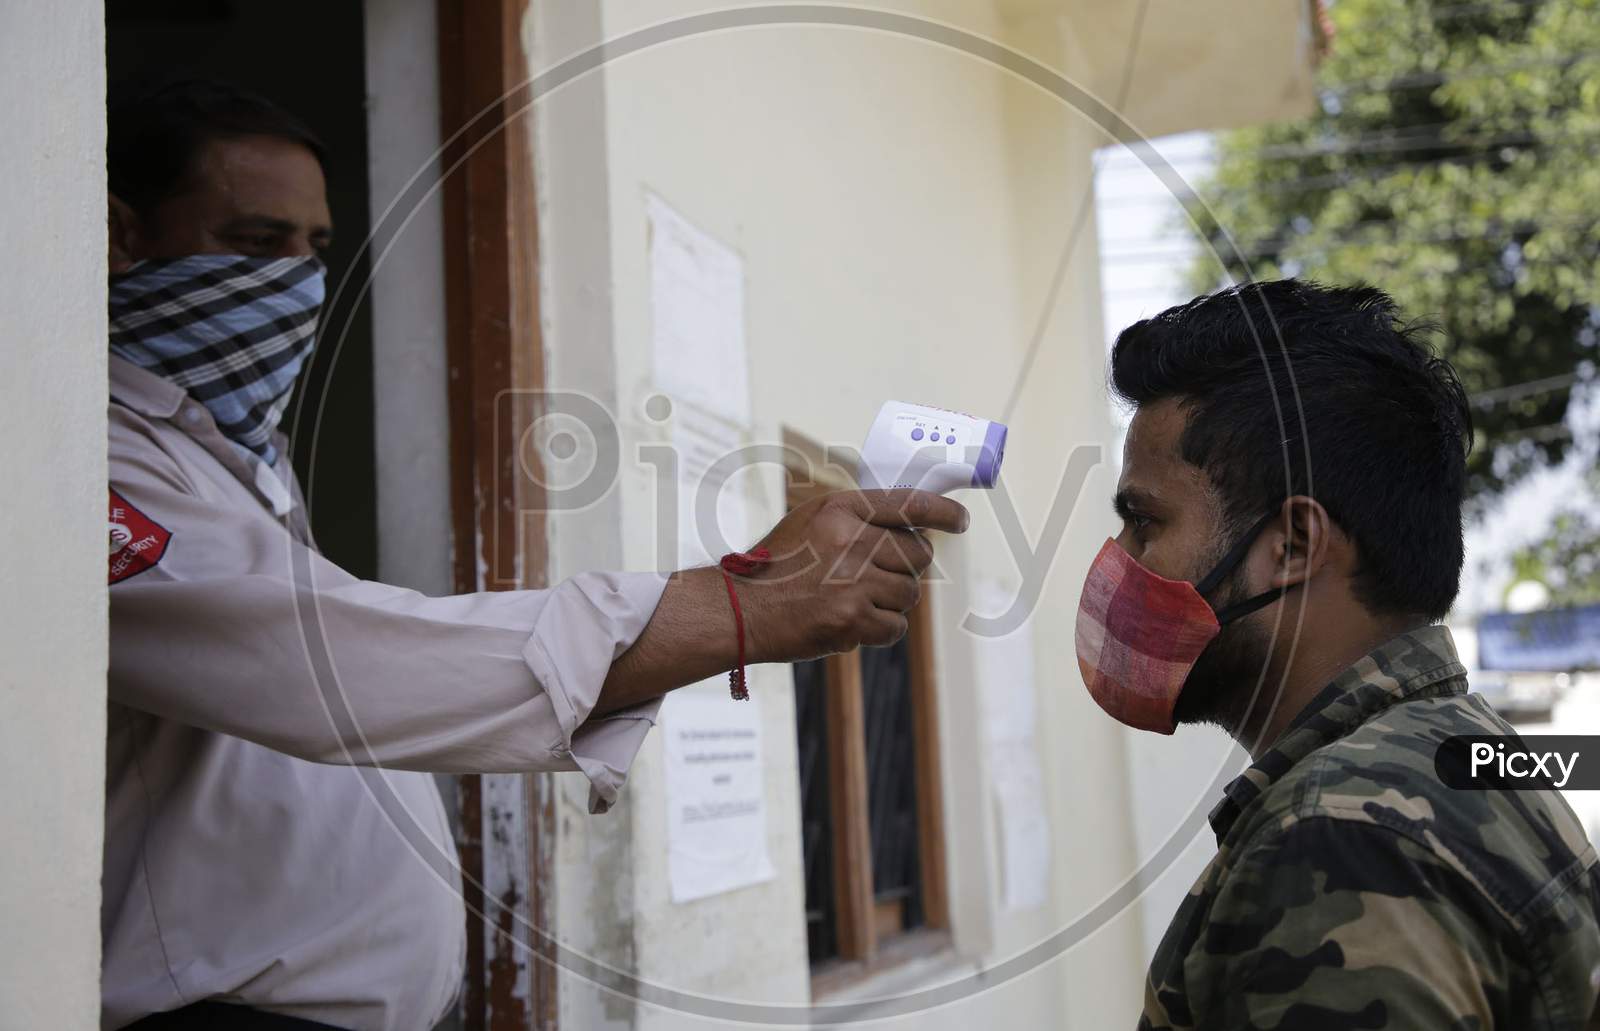 School staff being checked for body temperature before allowing  with circles to ensure social distancing  among students as preparations are underway to open the educational institutions in Jammu for select classes after nearly six months closure due to the outbreak of Coronavirus pandemic on Septe